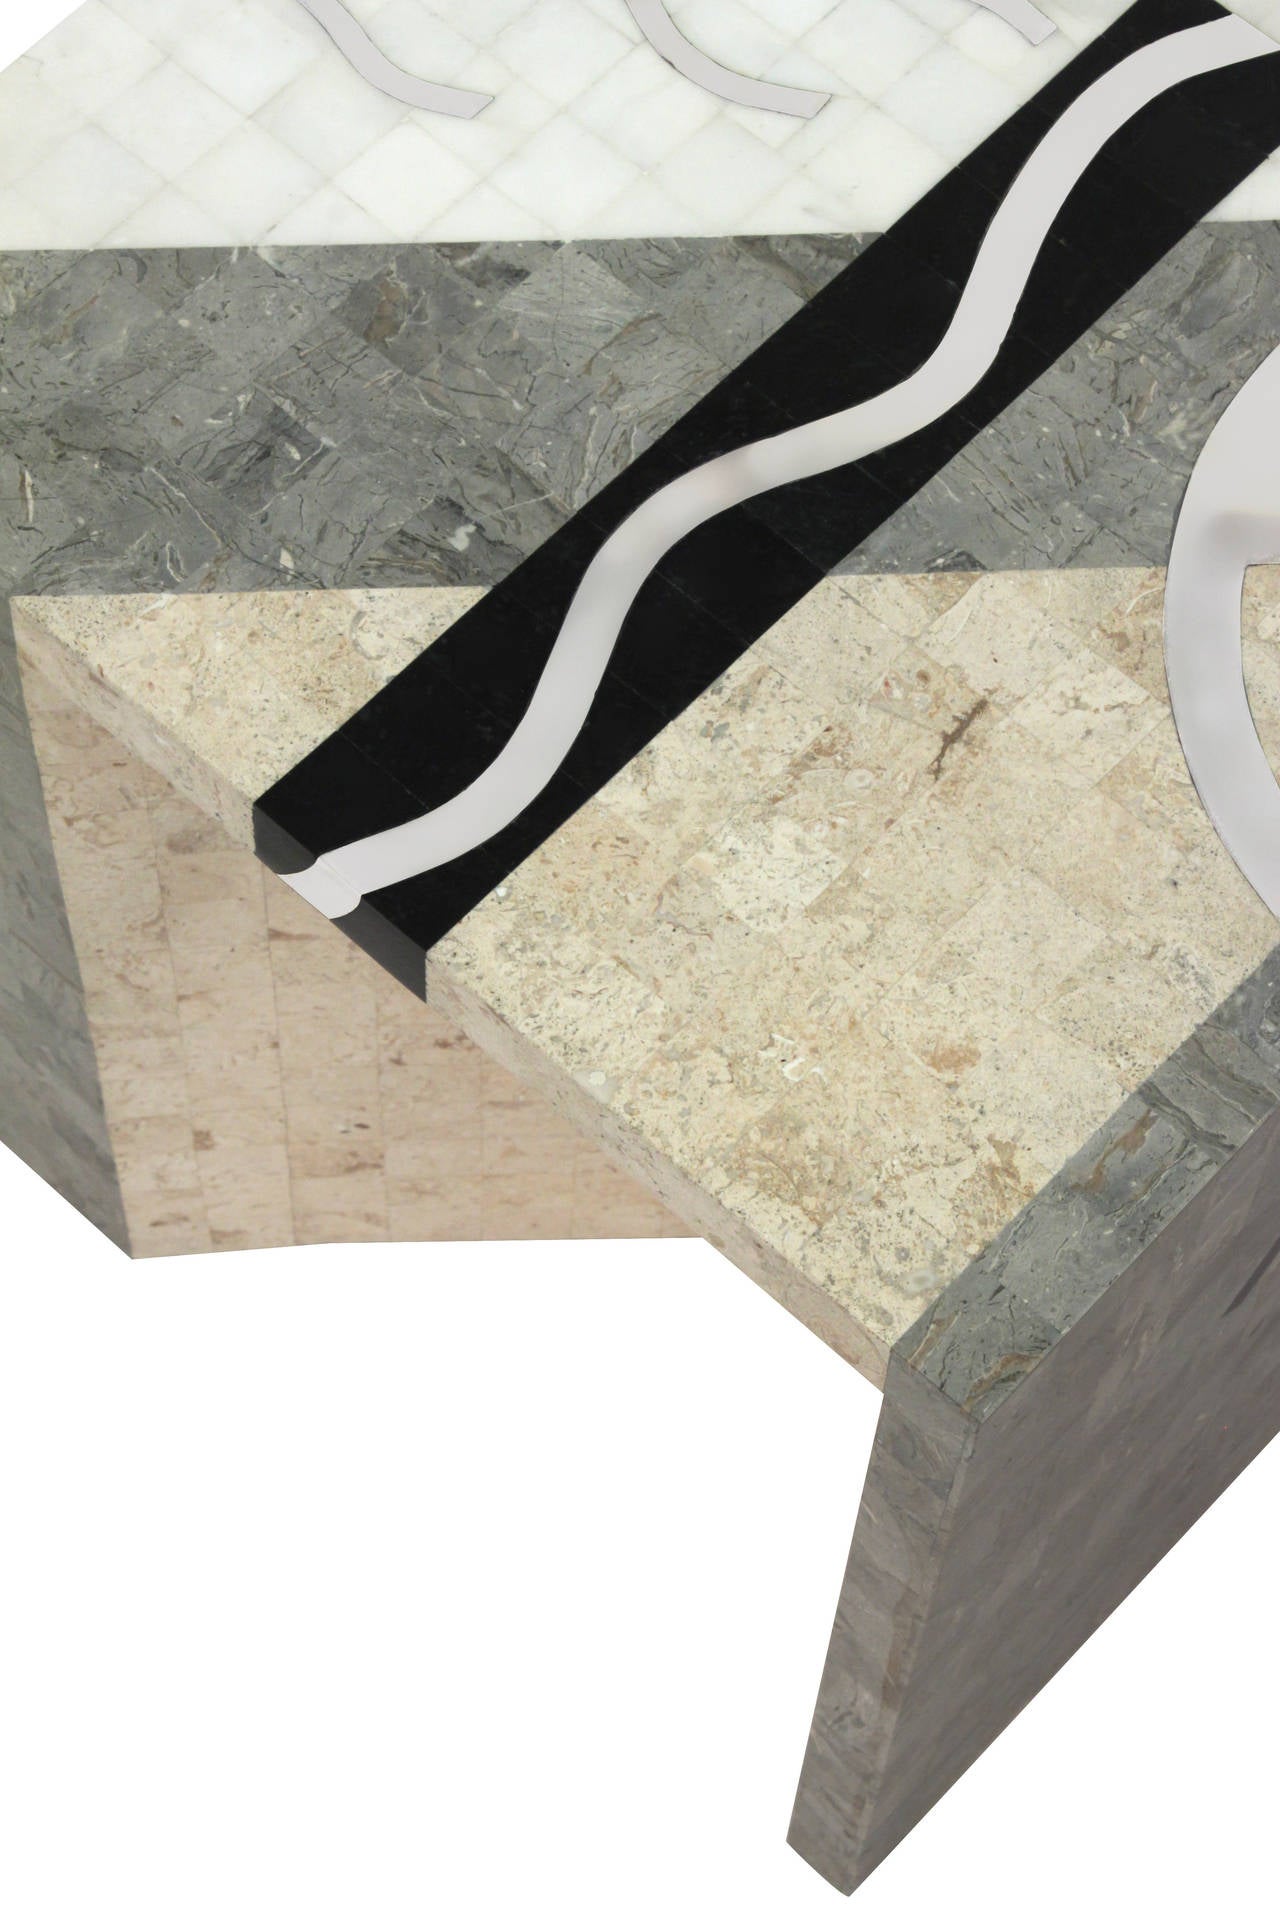 Late 20th Century Side Table in Tessellated Stone and Chrome with Abstract Inlaid Design